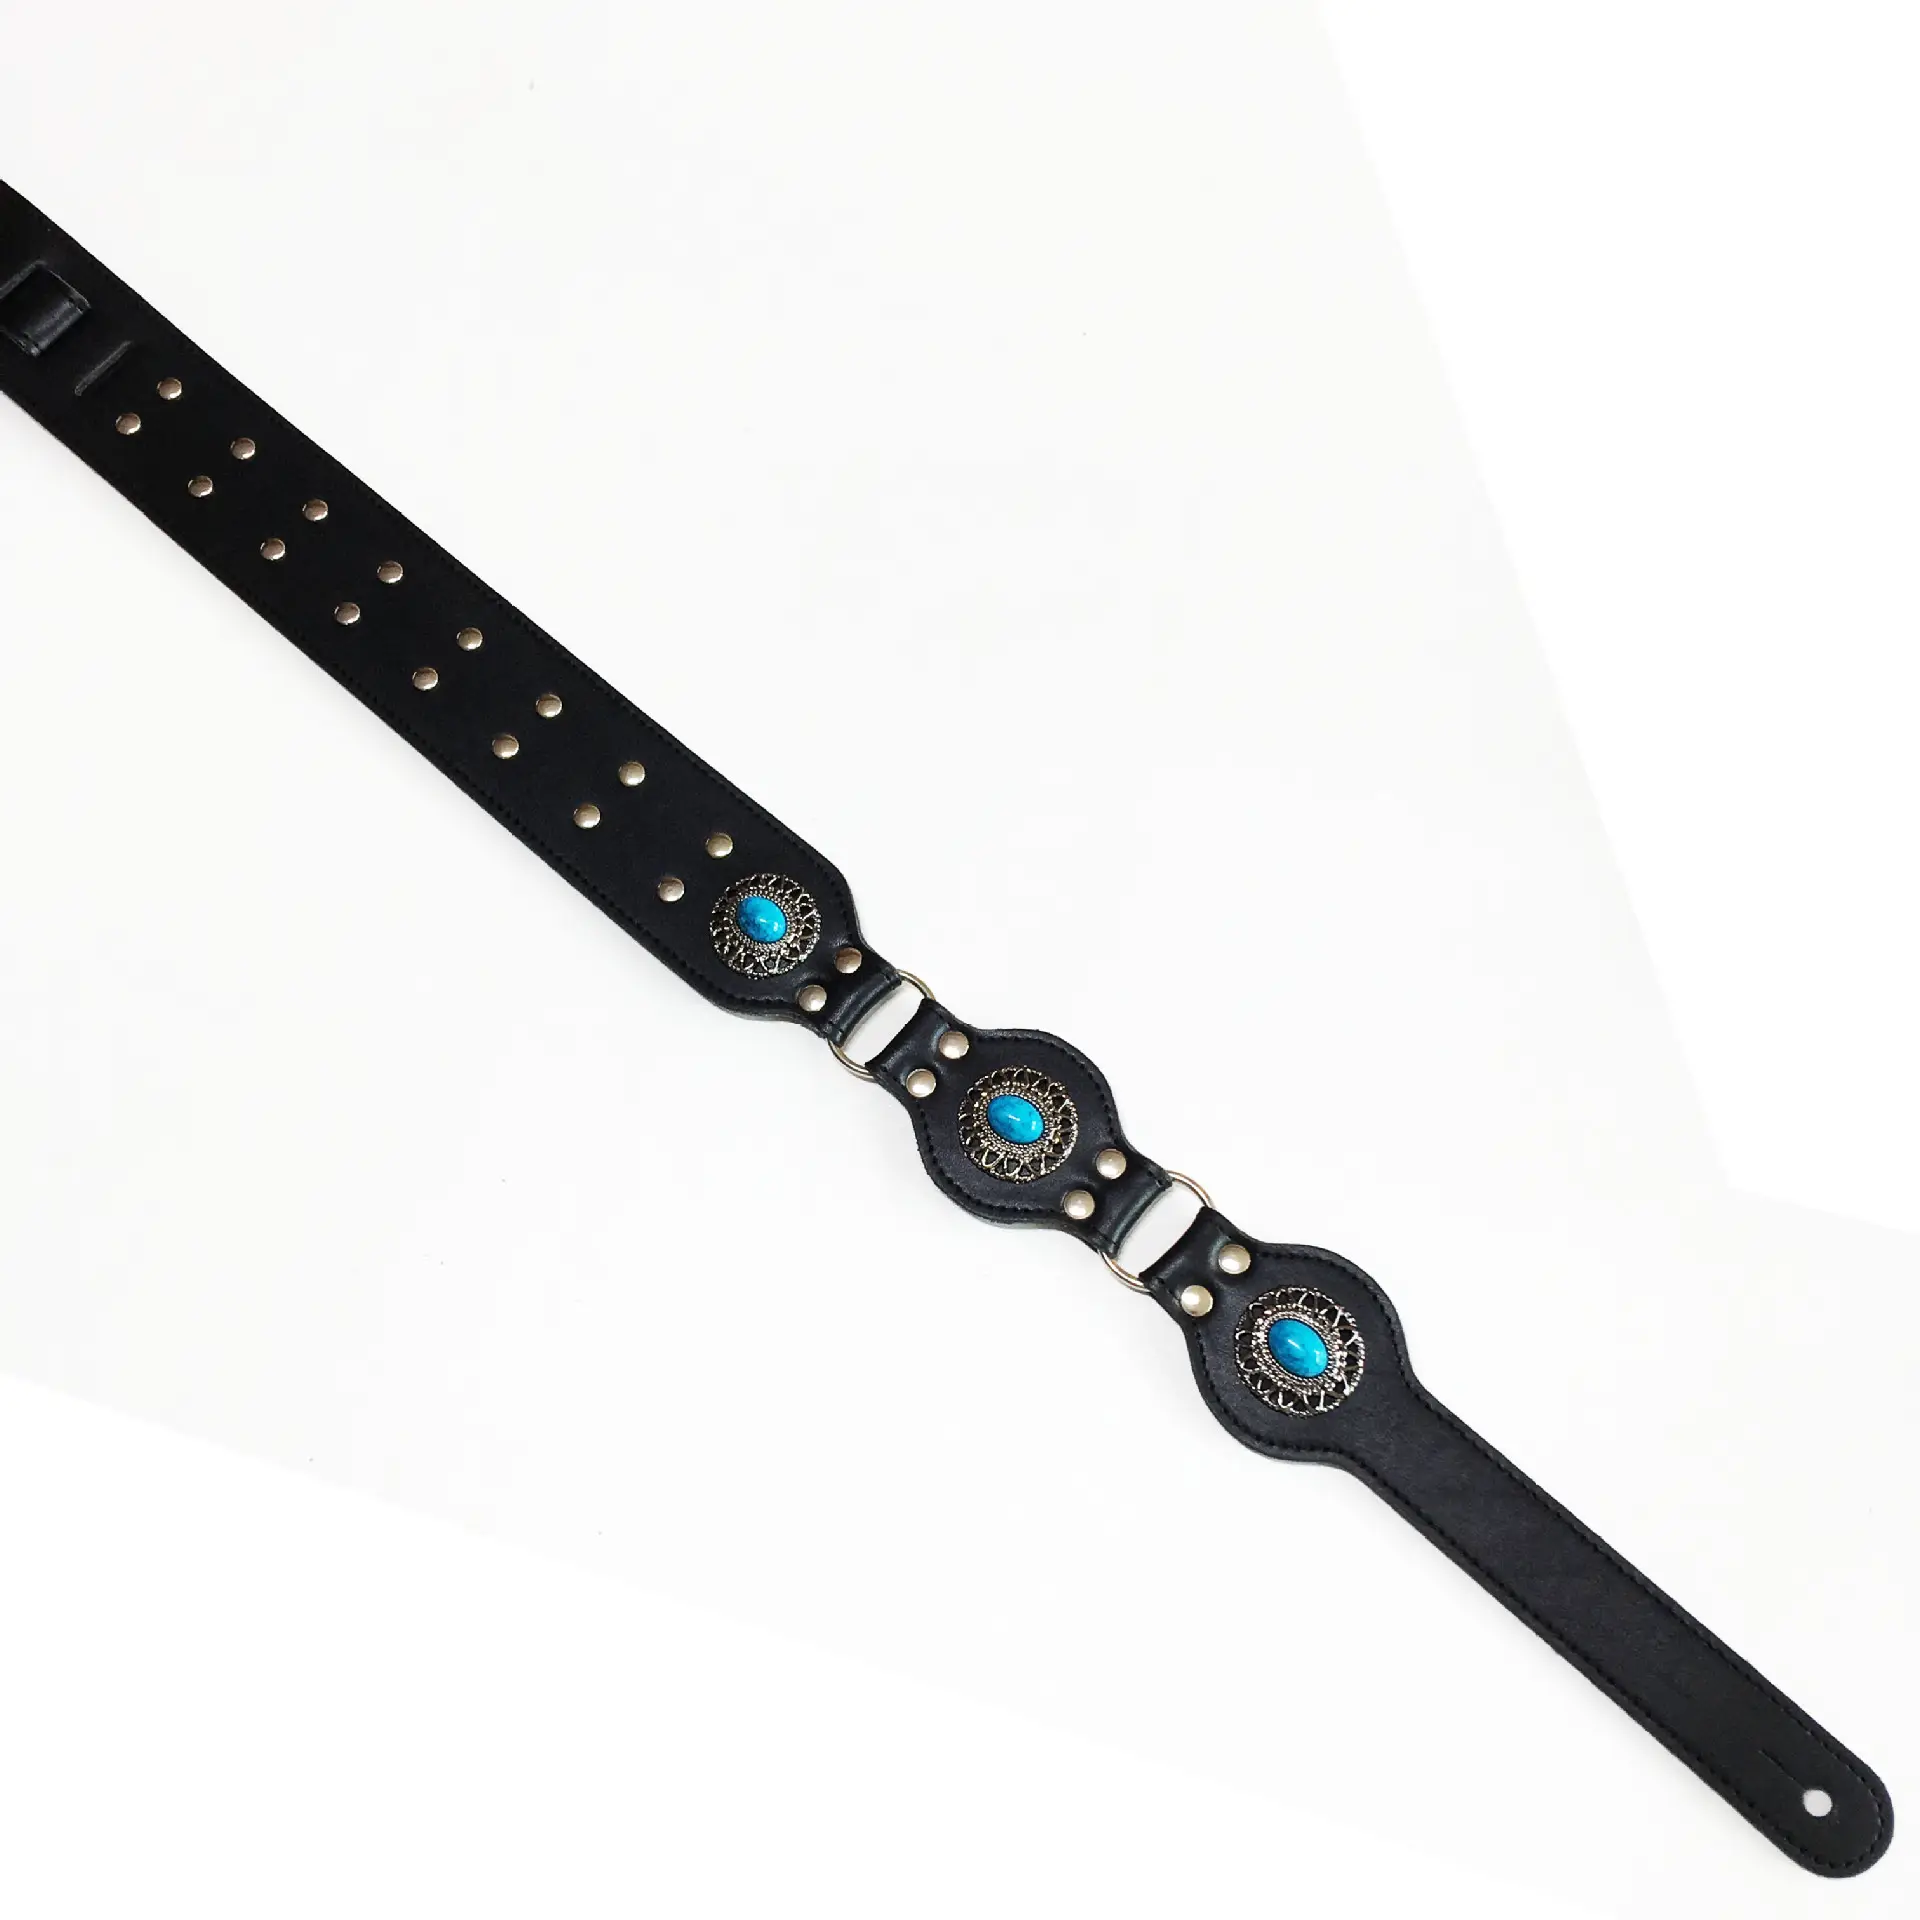 Turquoise Inlaid Fancy Leather Guitar Strap Vintage Ring Link Instrument Strap